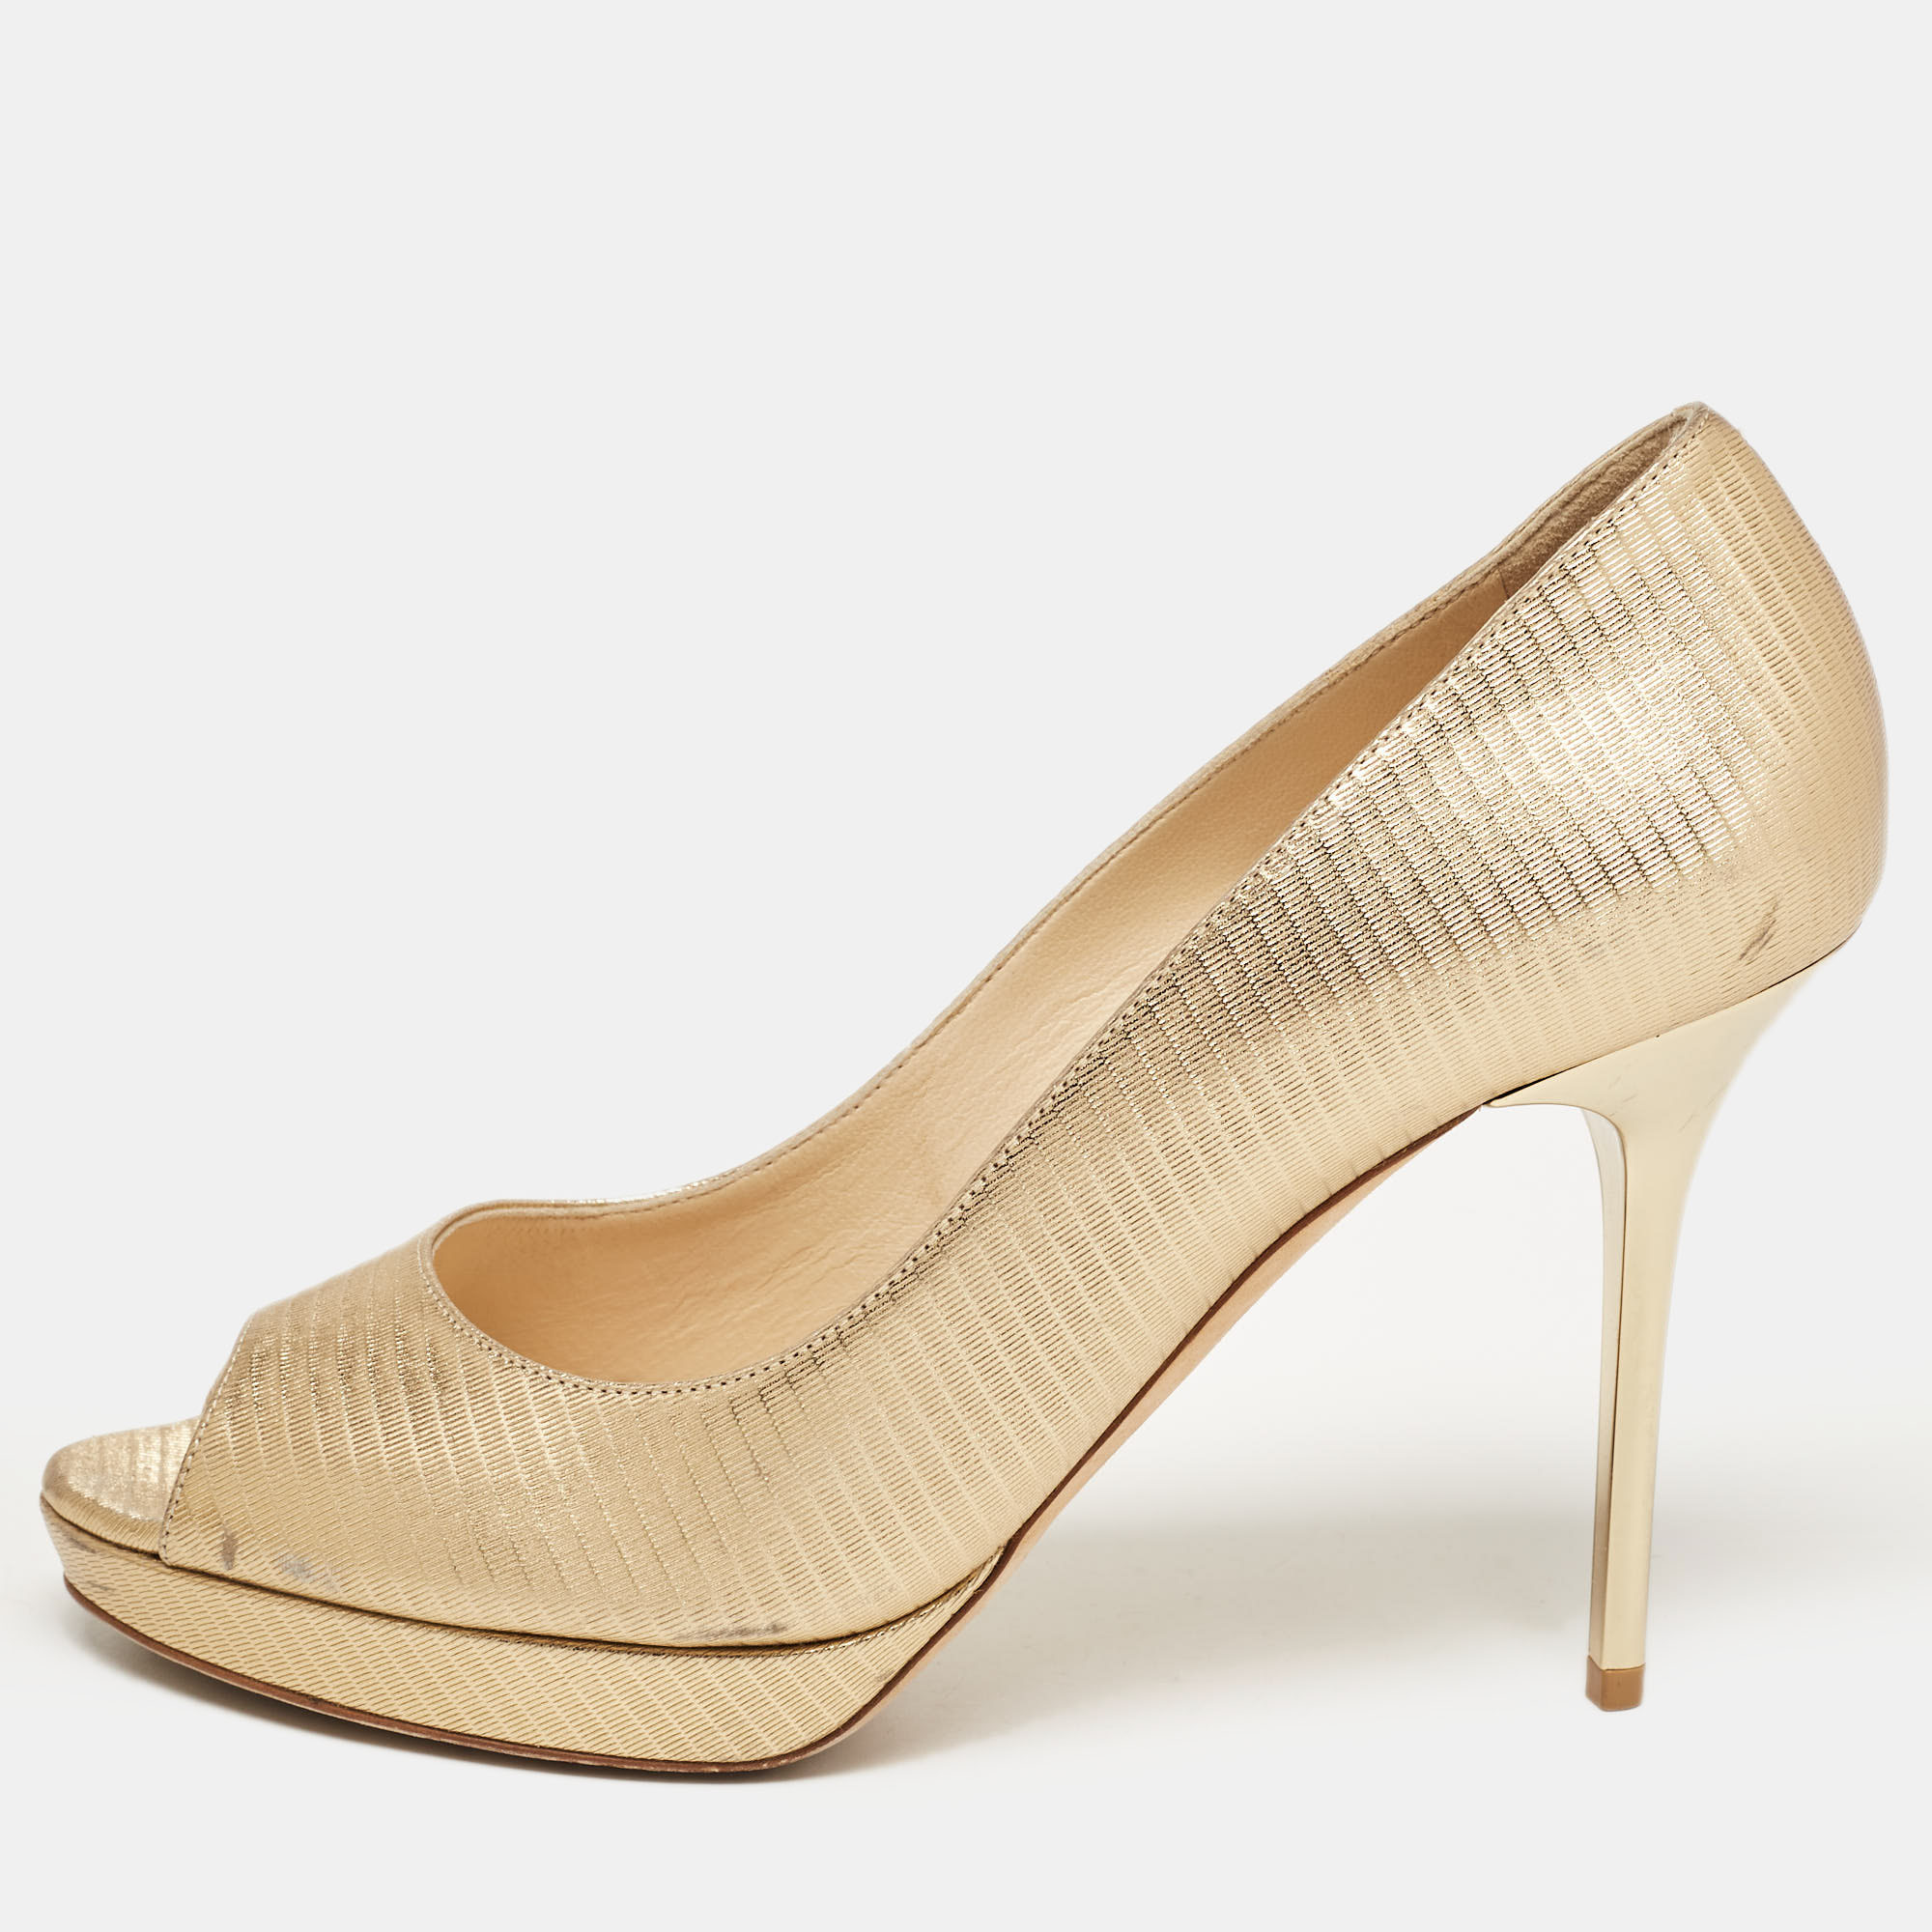 Jimmy choo gold textured leather luna pumps size 38.5